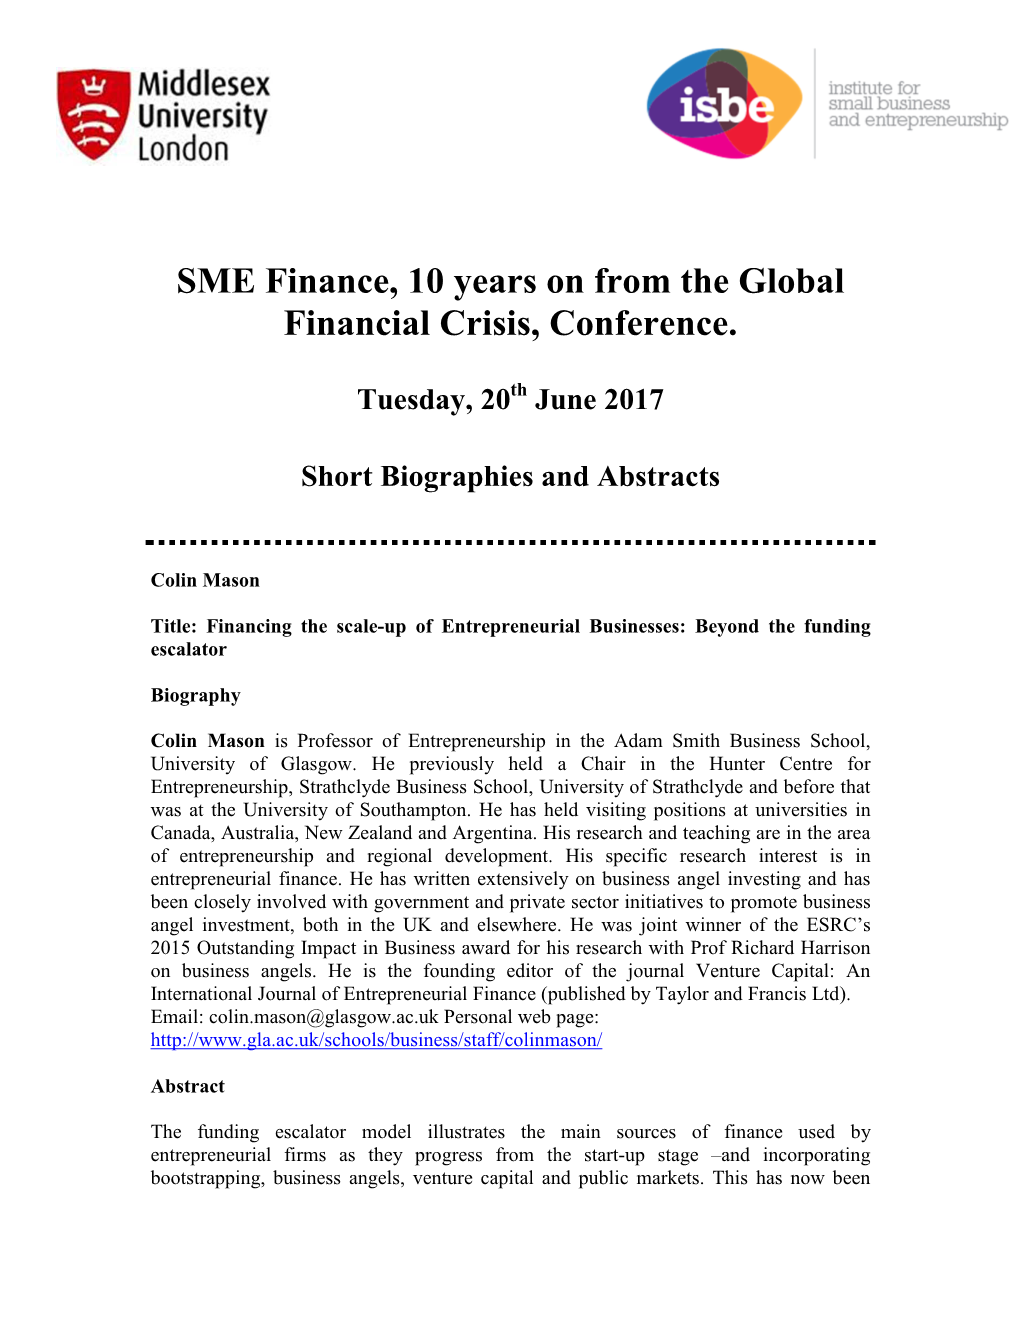 SME Finance, 10 Years on from the Global Financial Crisis, Conference